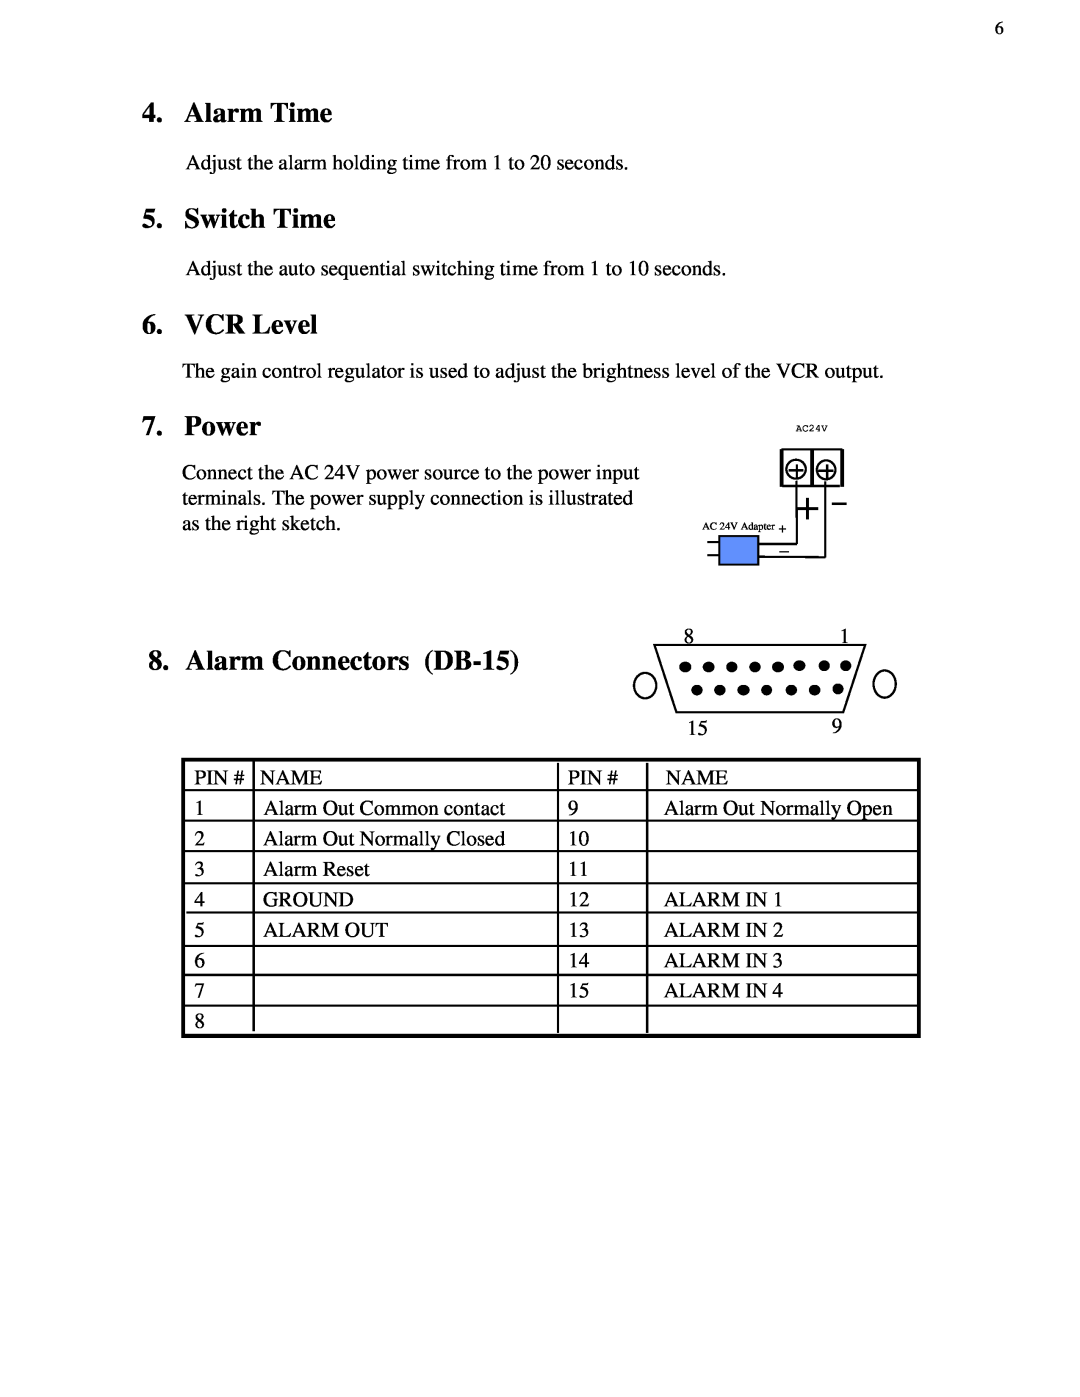 EverFocus 4BQ user manual Alarm Time, Switch Time, VCR Level, Power, Alarm Connectors DB-15 